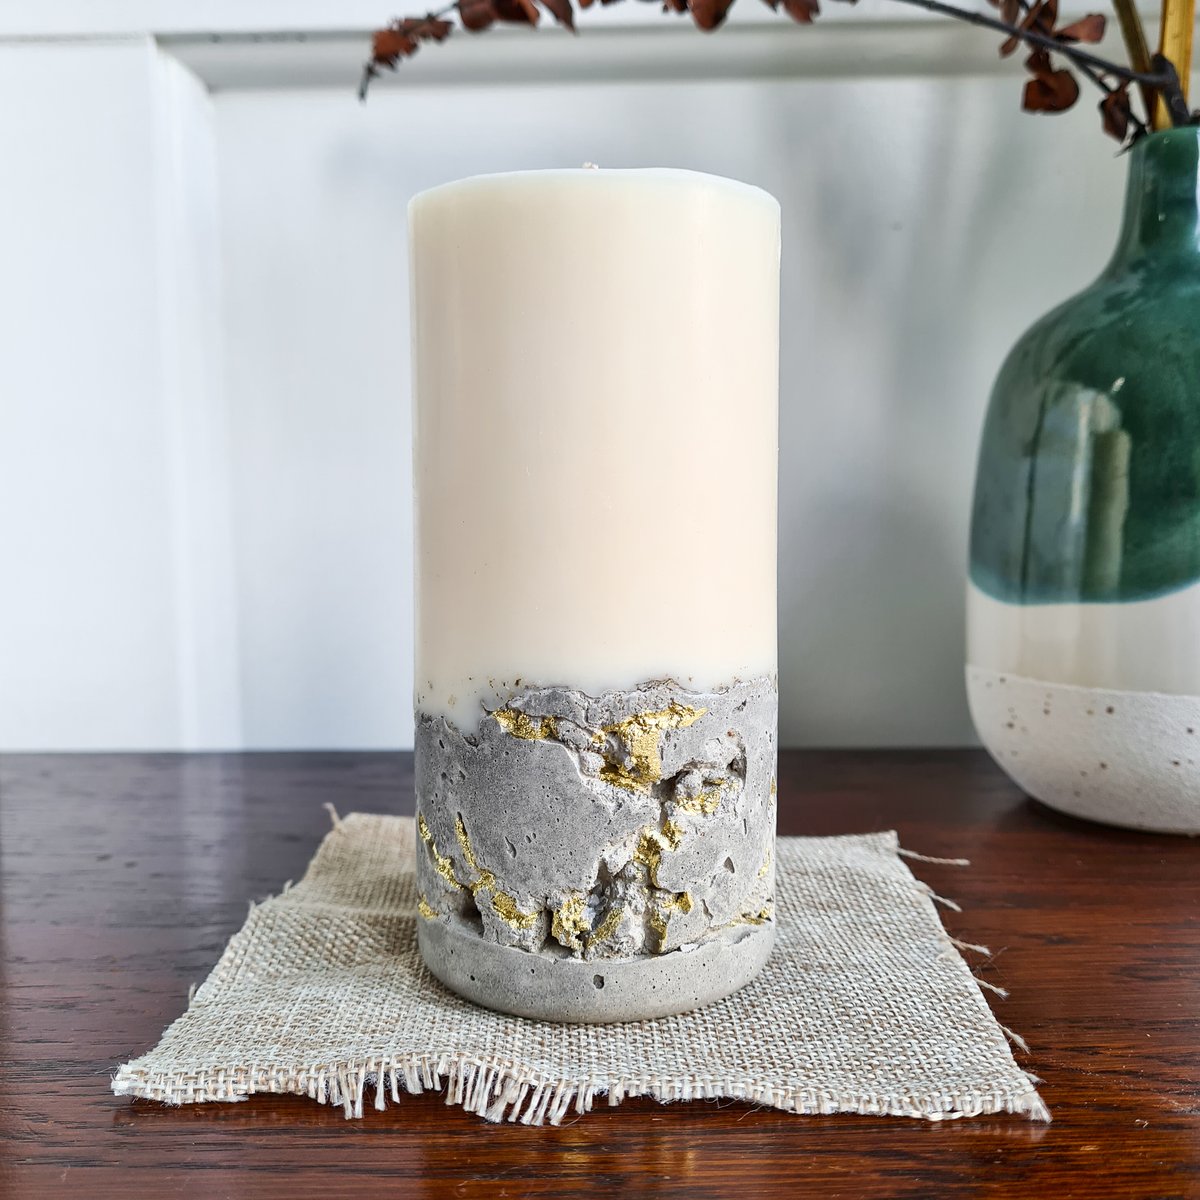 Soy Wax Concrete Candle - Gold Detail 